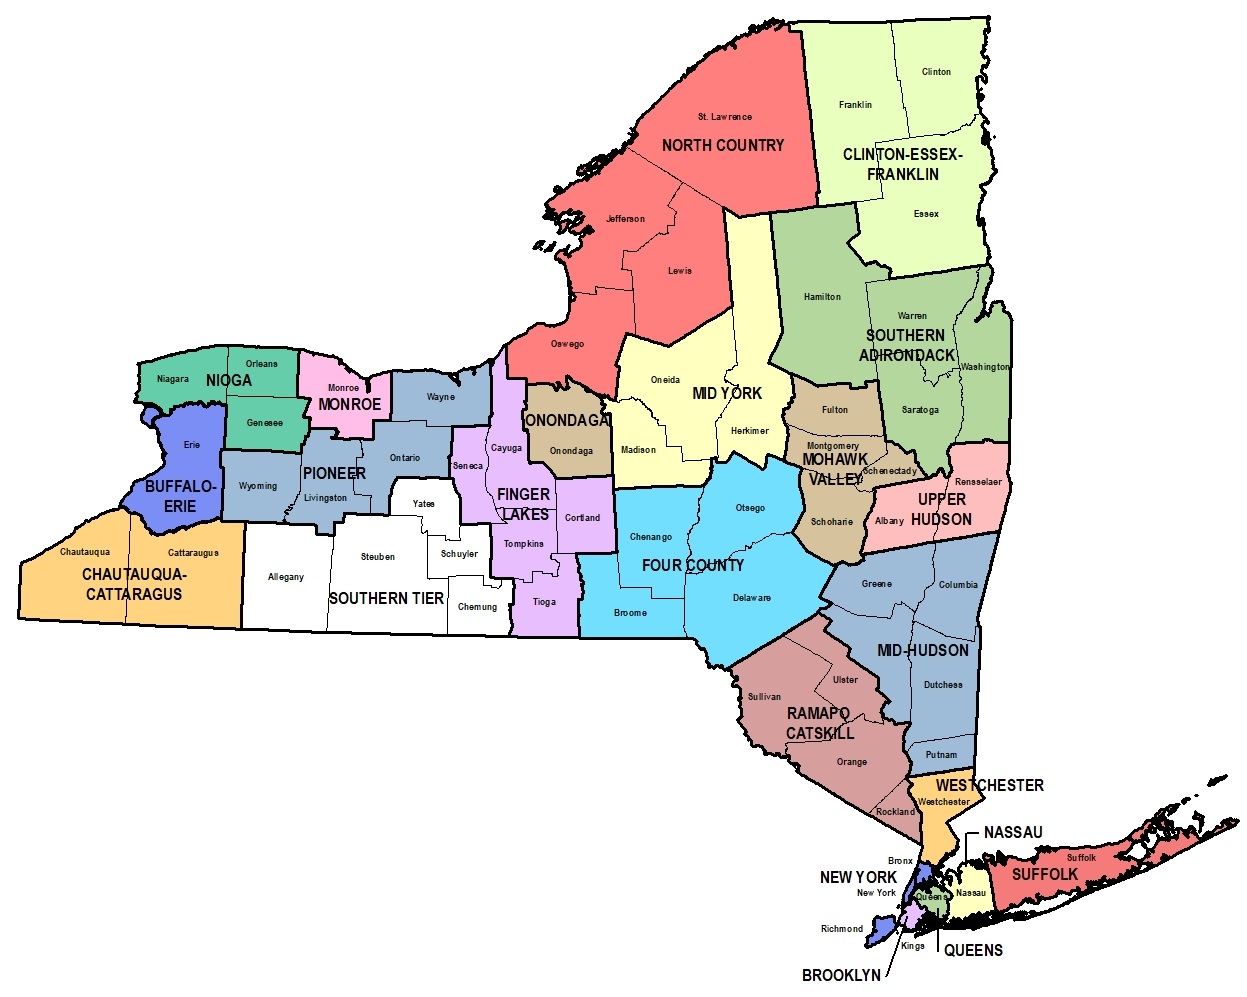 Image map of public library systems in New York State; click on the image to go to the map